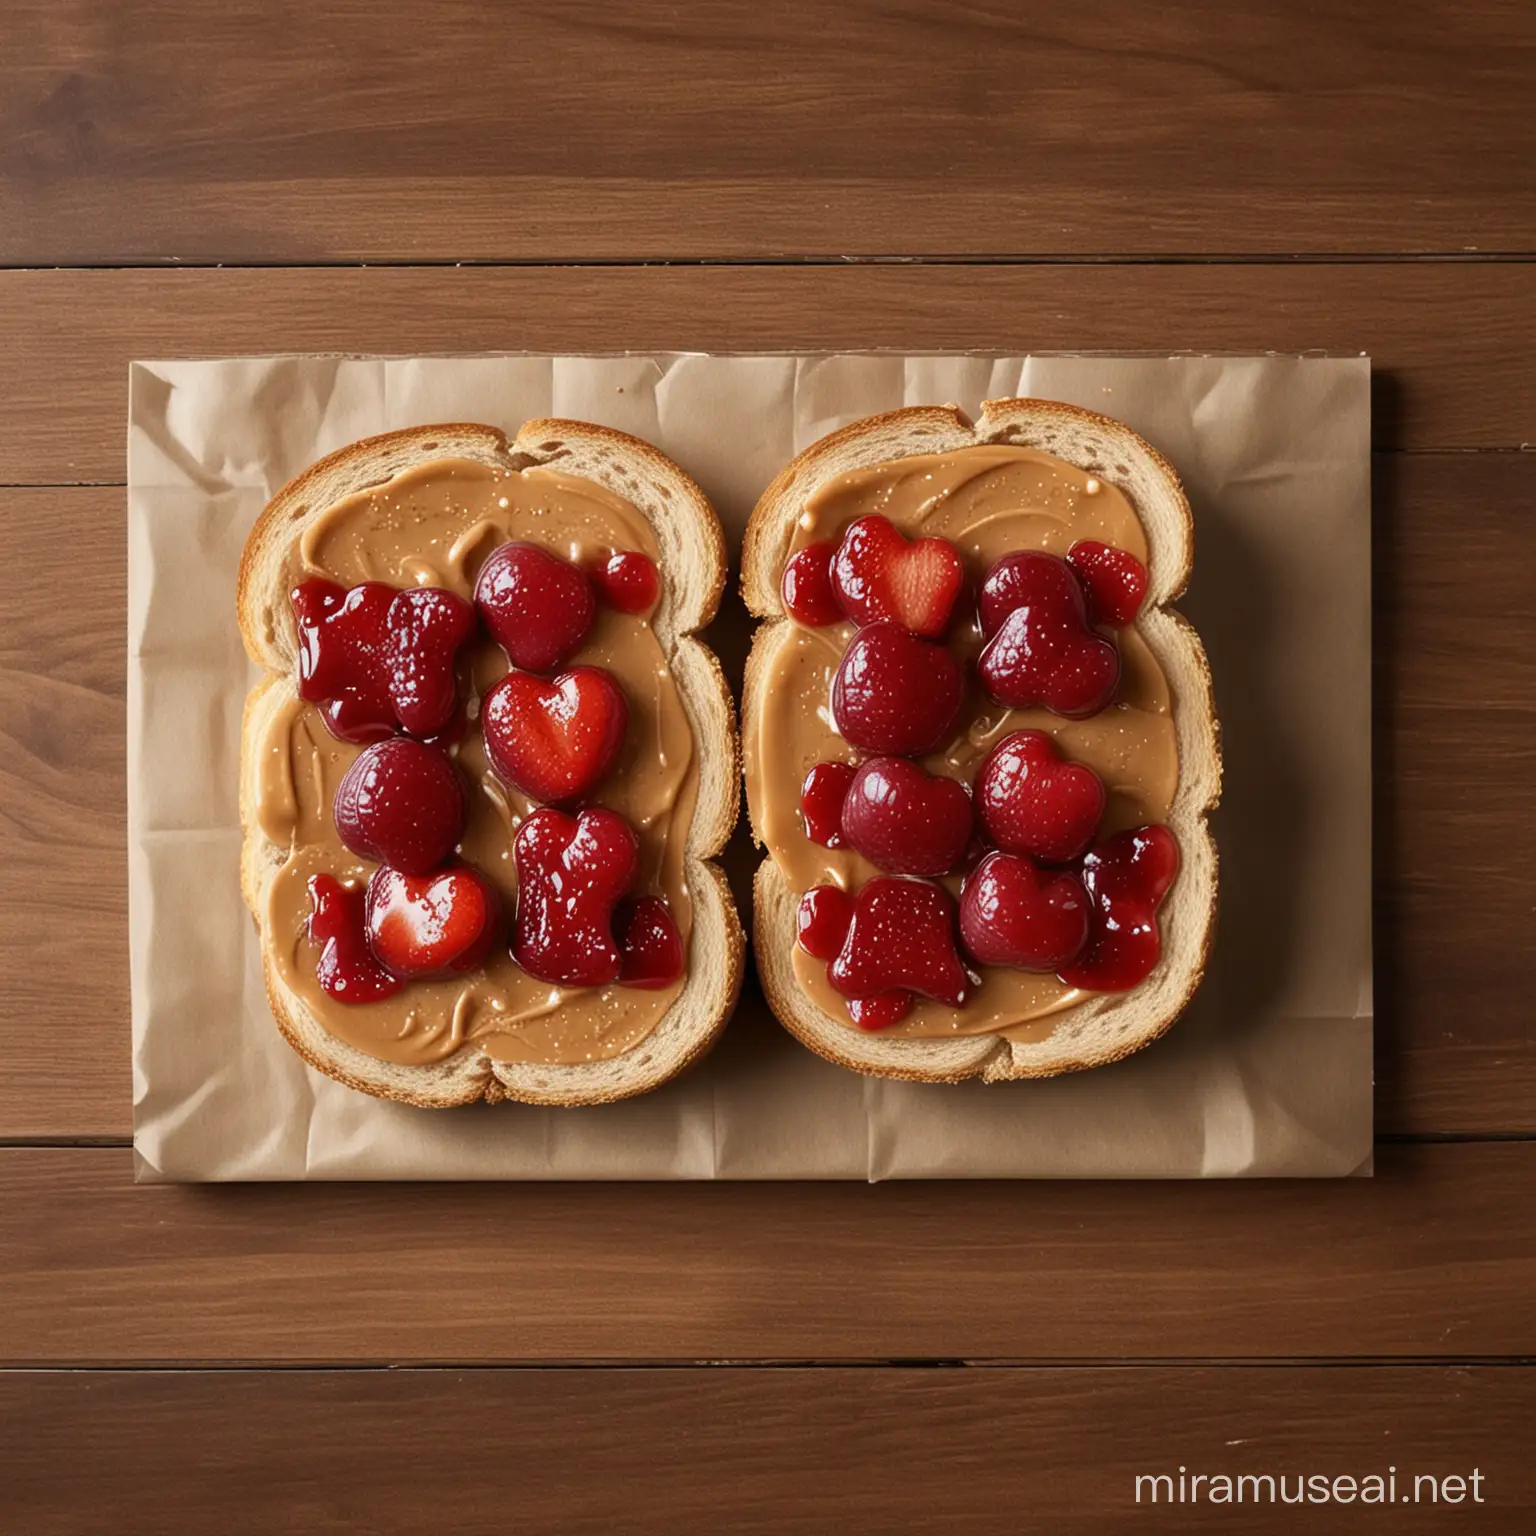 Peanut Butter and Jelly Love Story The Ultimate Comfort Food Embrace